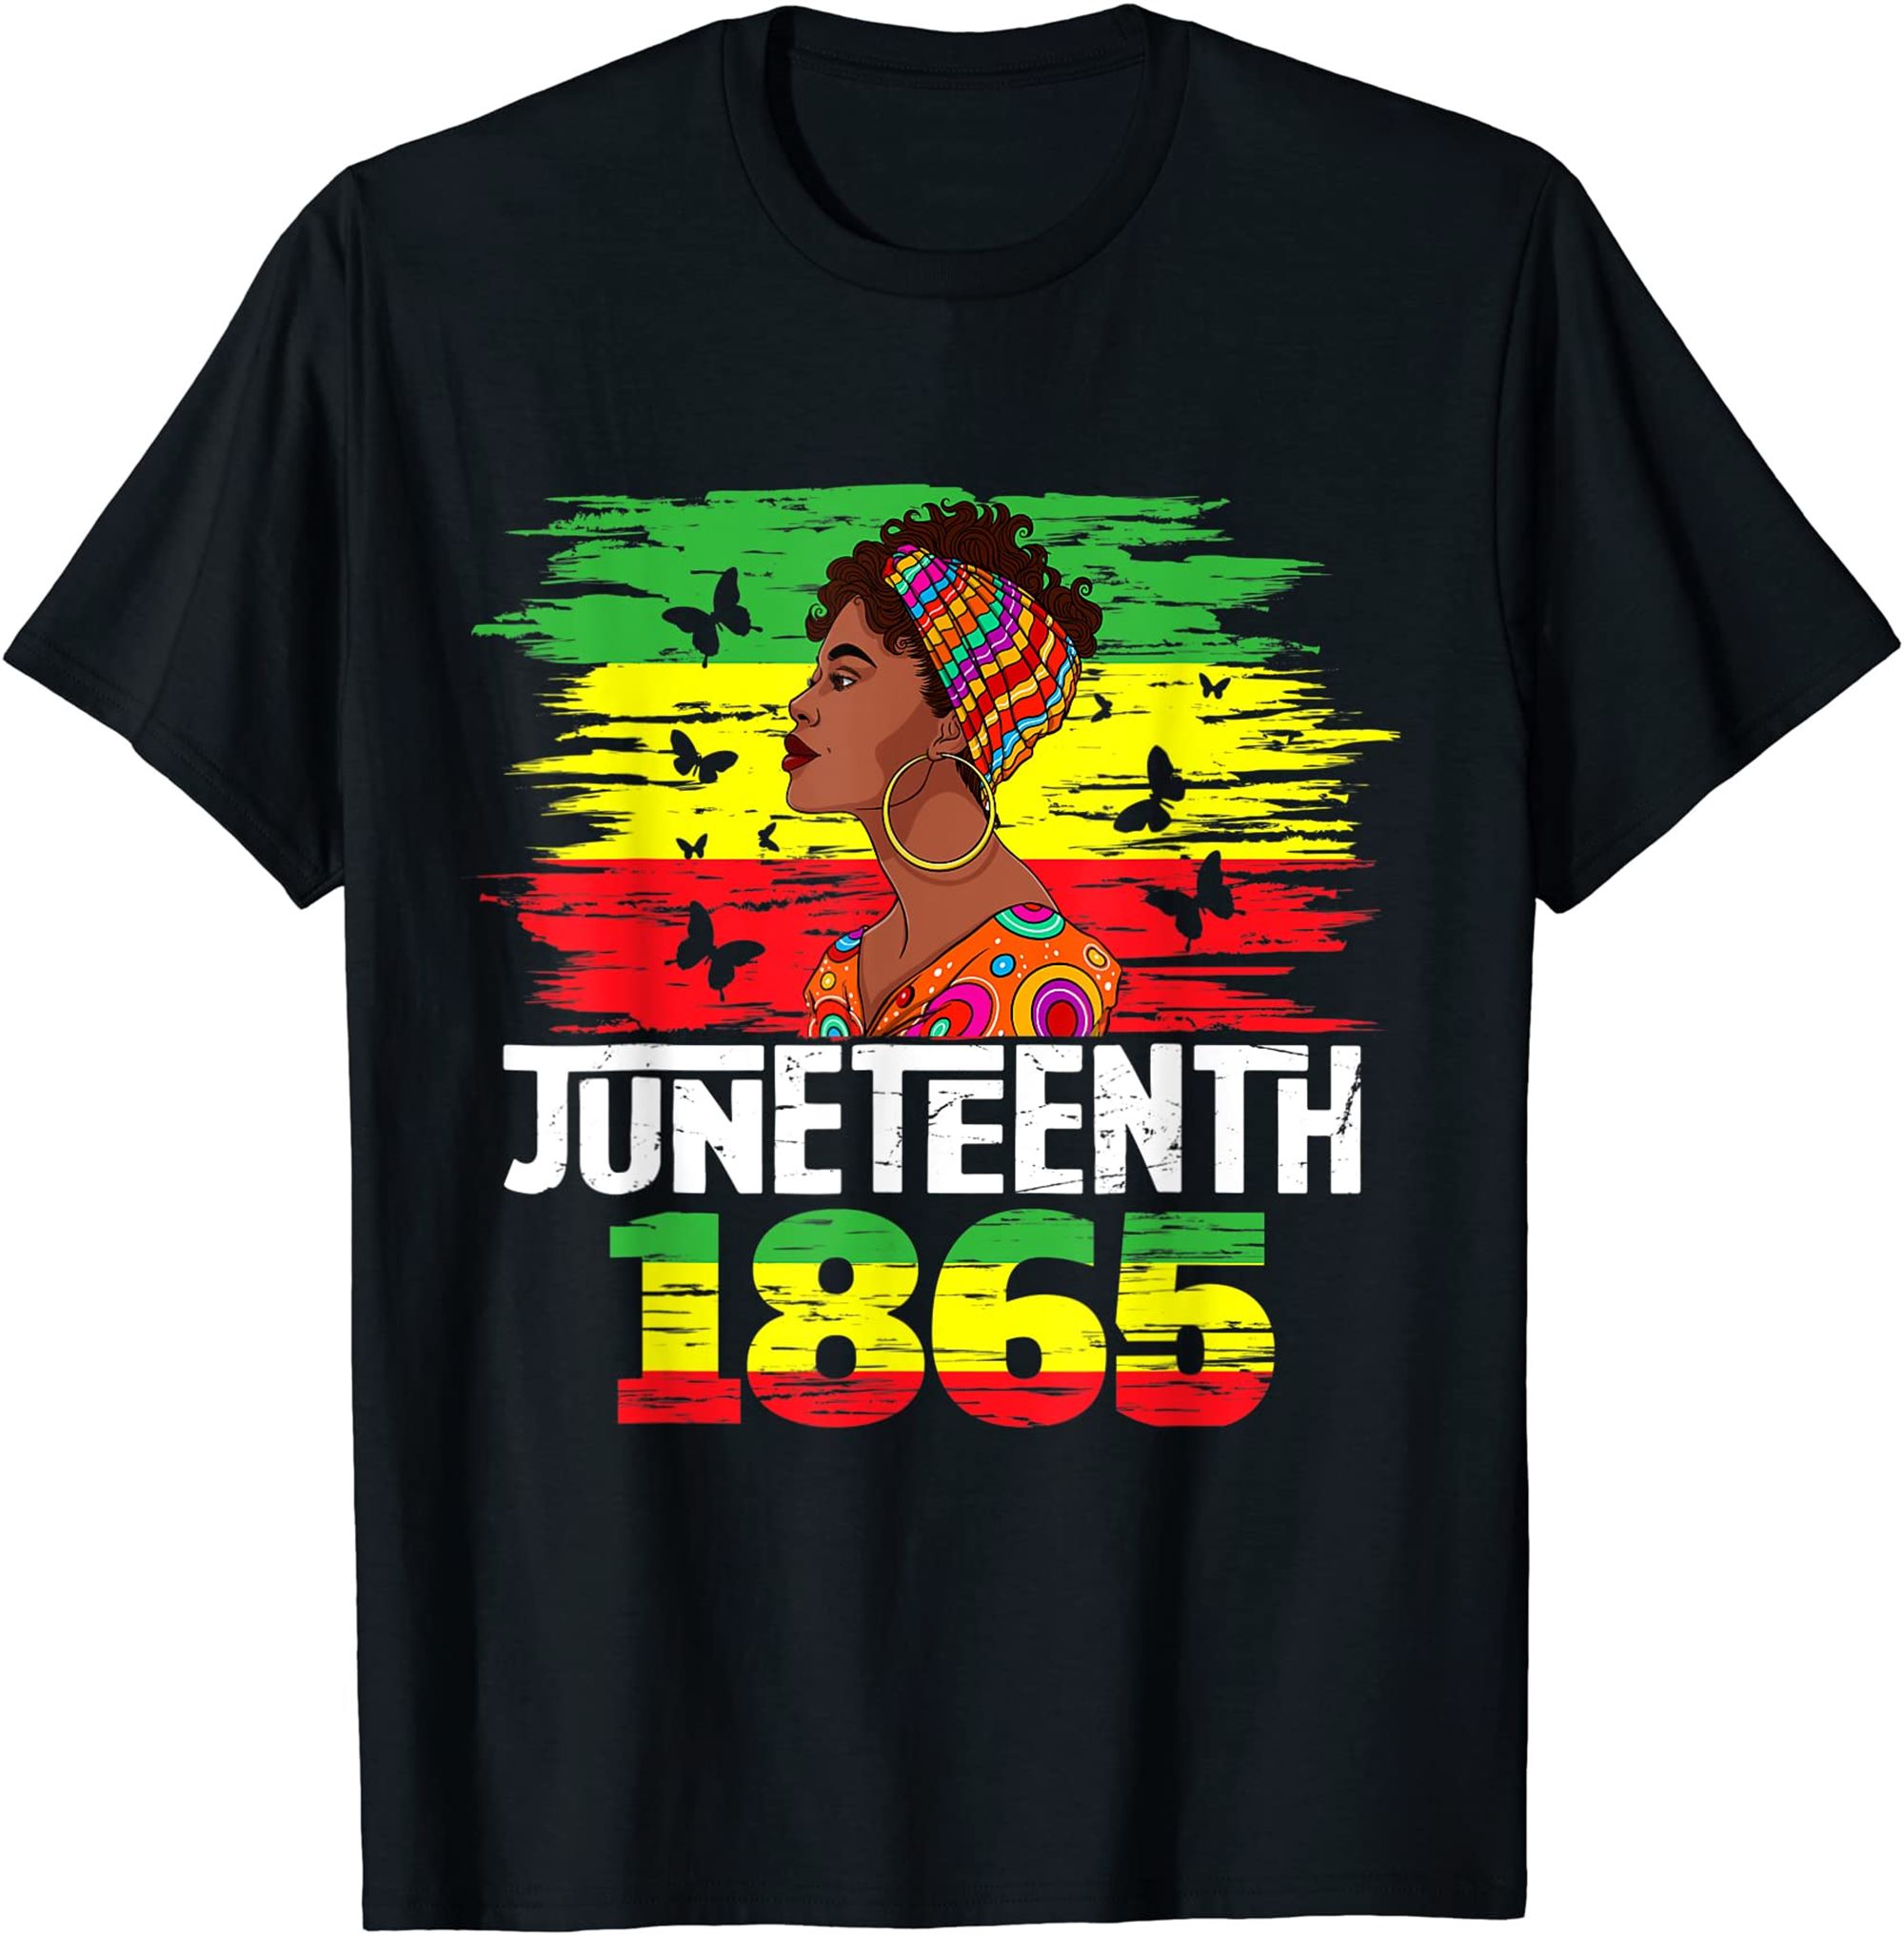 Juneteenth 1865 Independence Day Black Pride Black Women T-shirt Full Size Up To 5xl